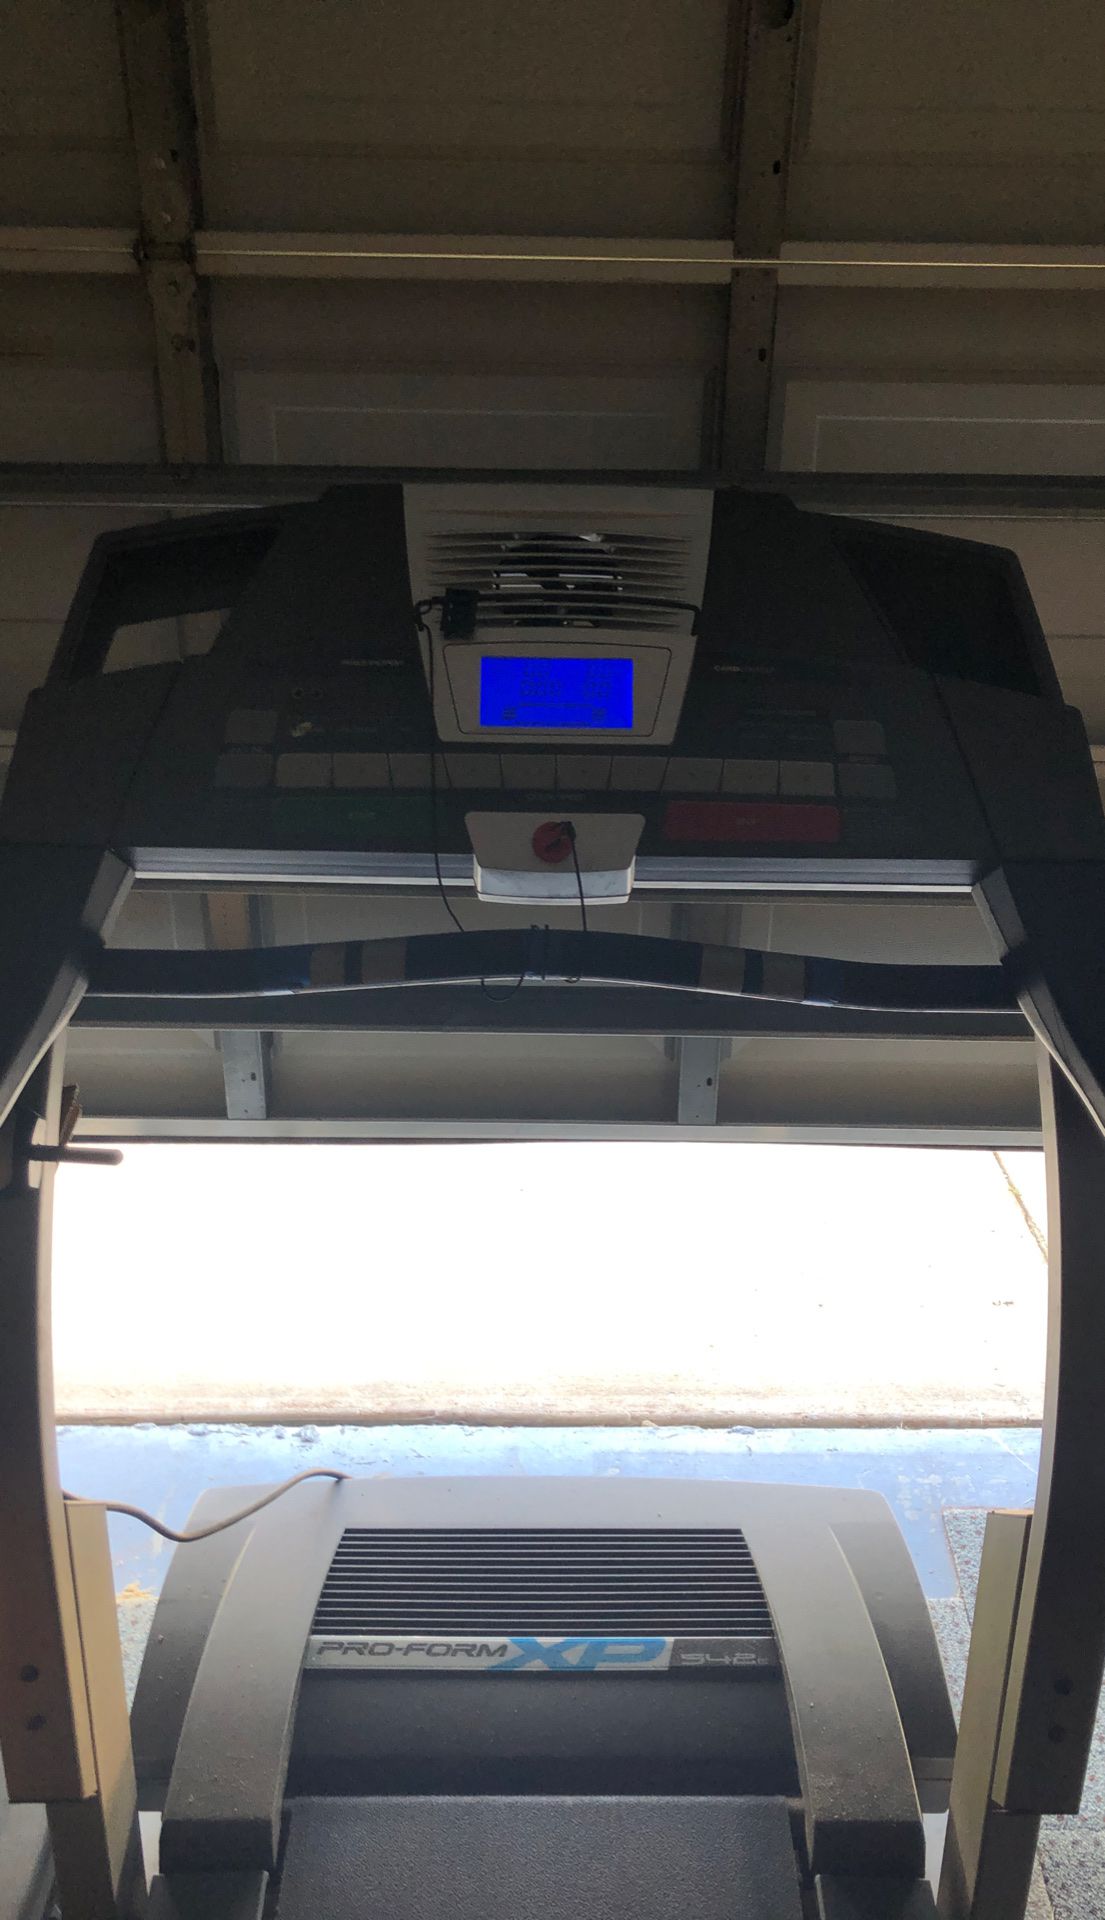 Treadmill Pro-form with incline function